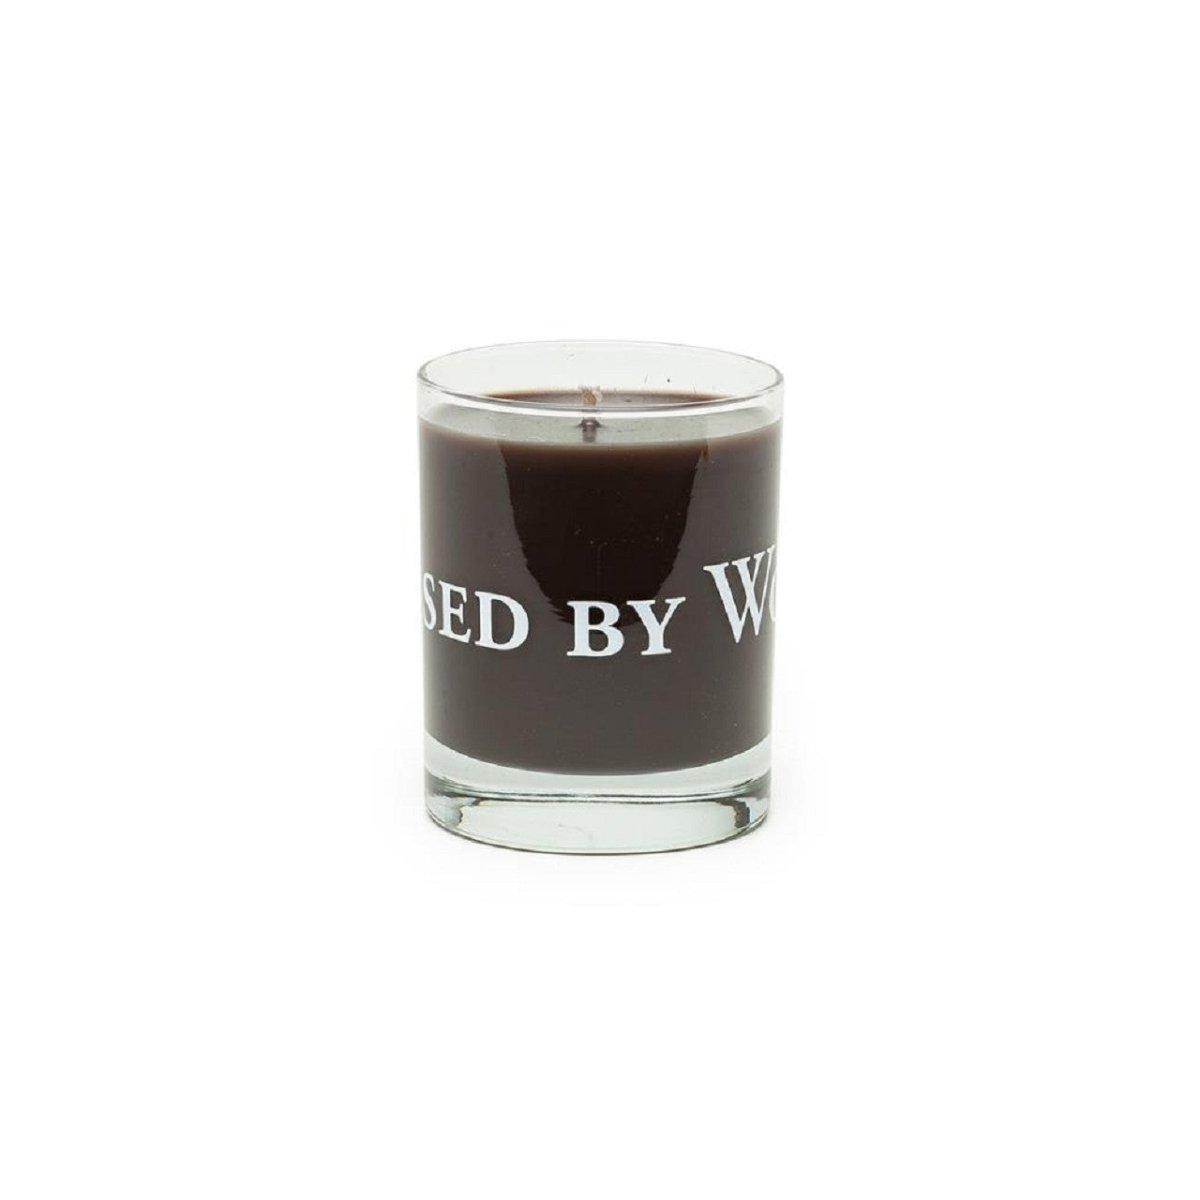 Raised by Wolves Sugar Shack Candle (Braun)  - Allike Store